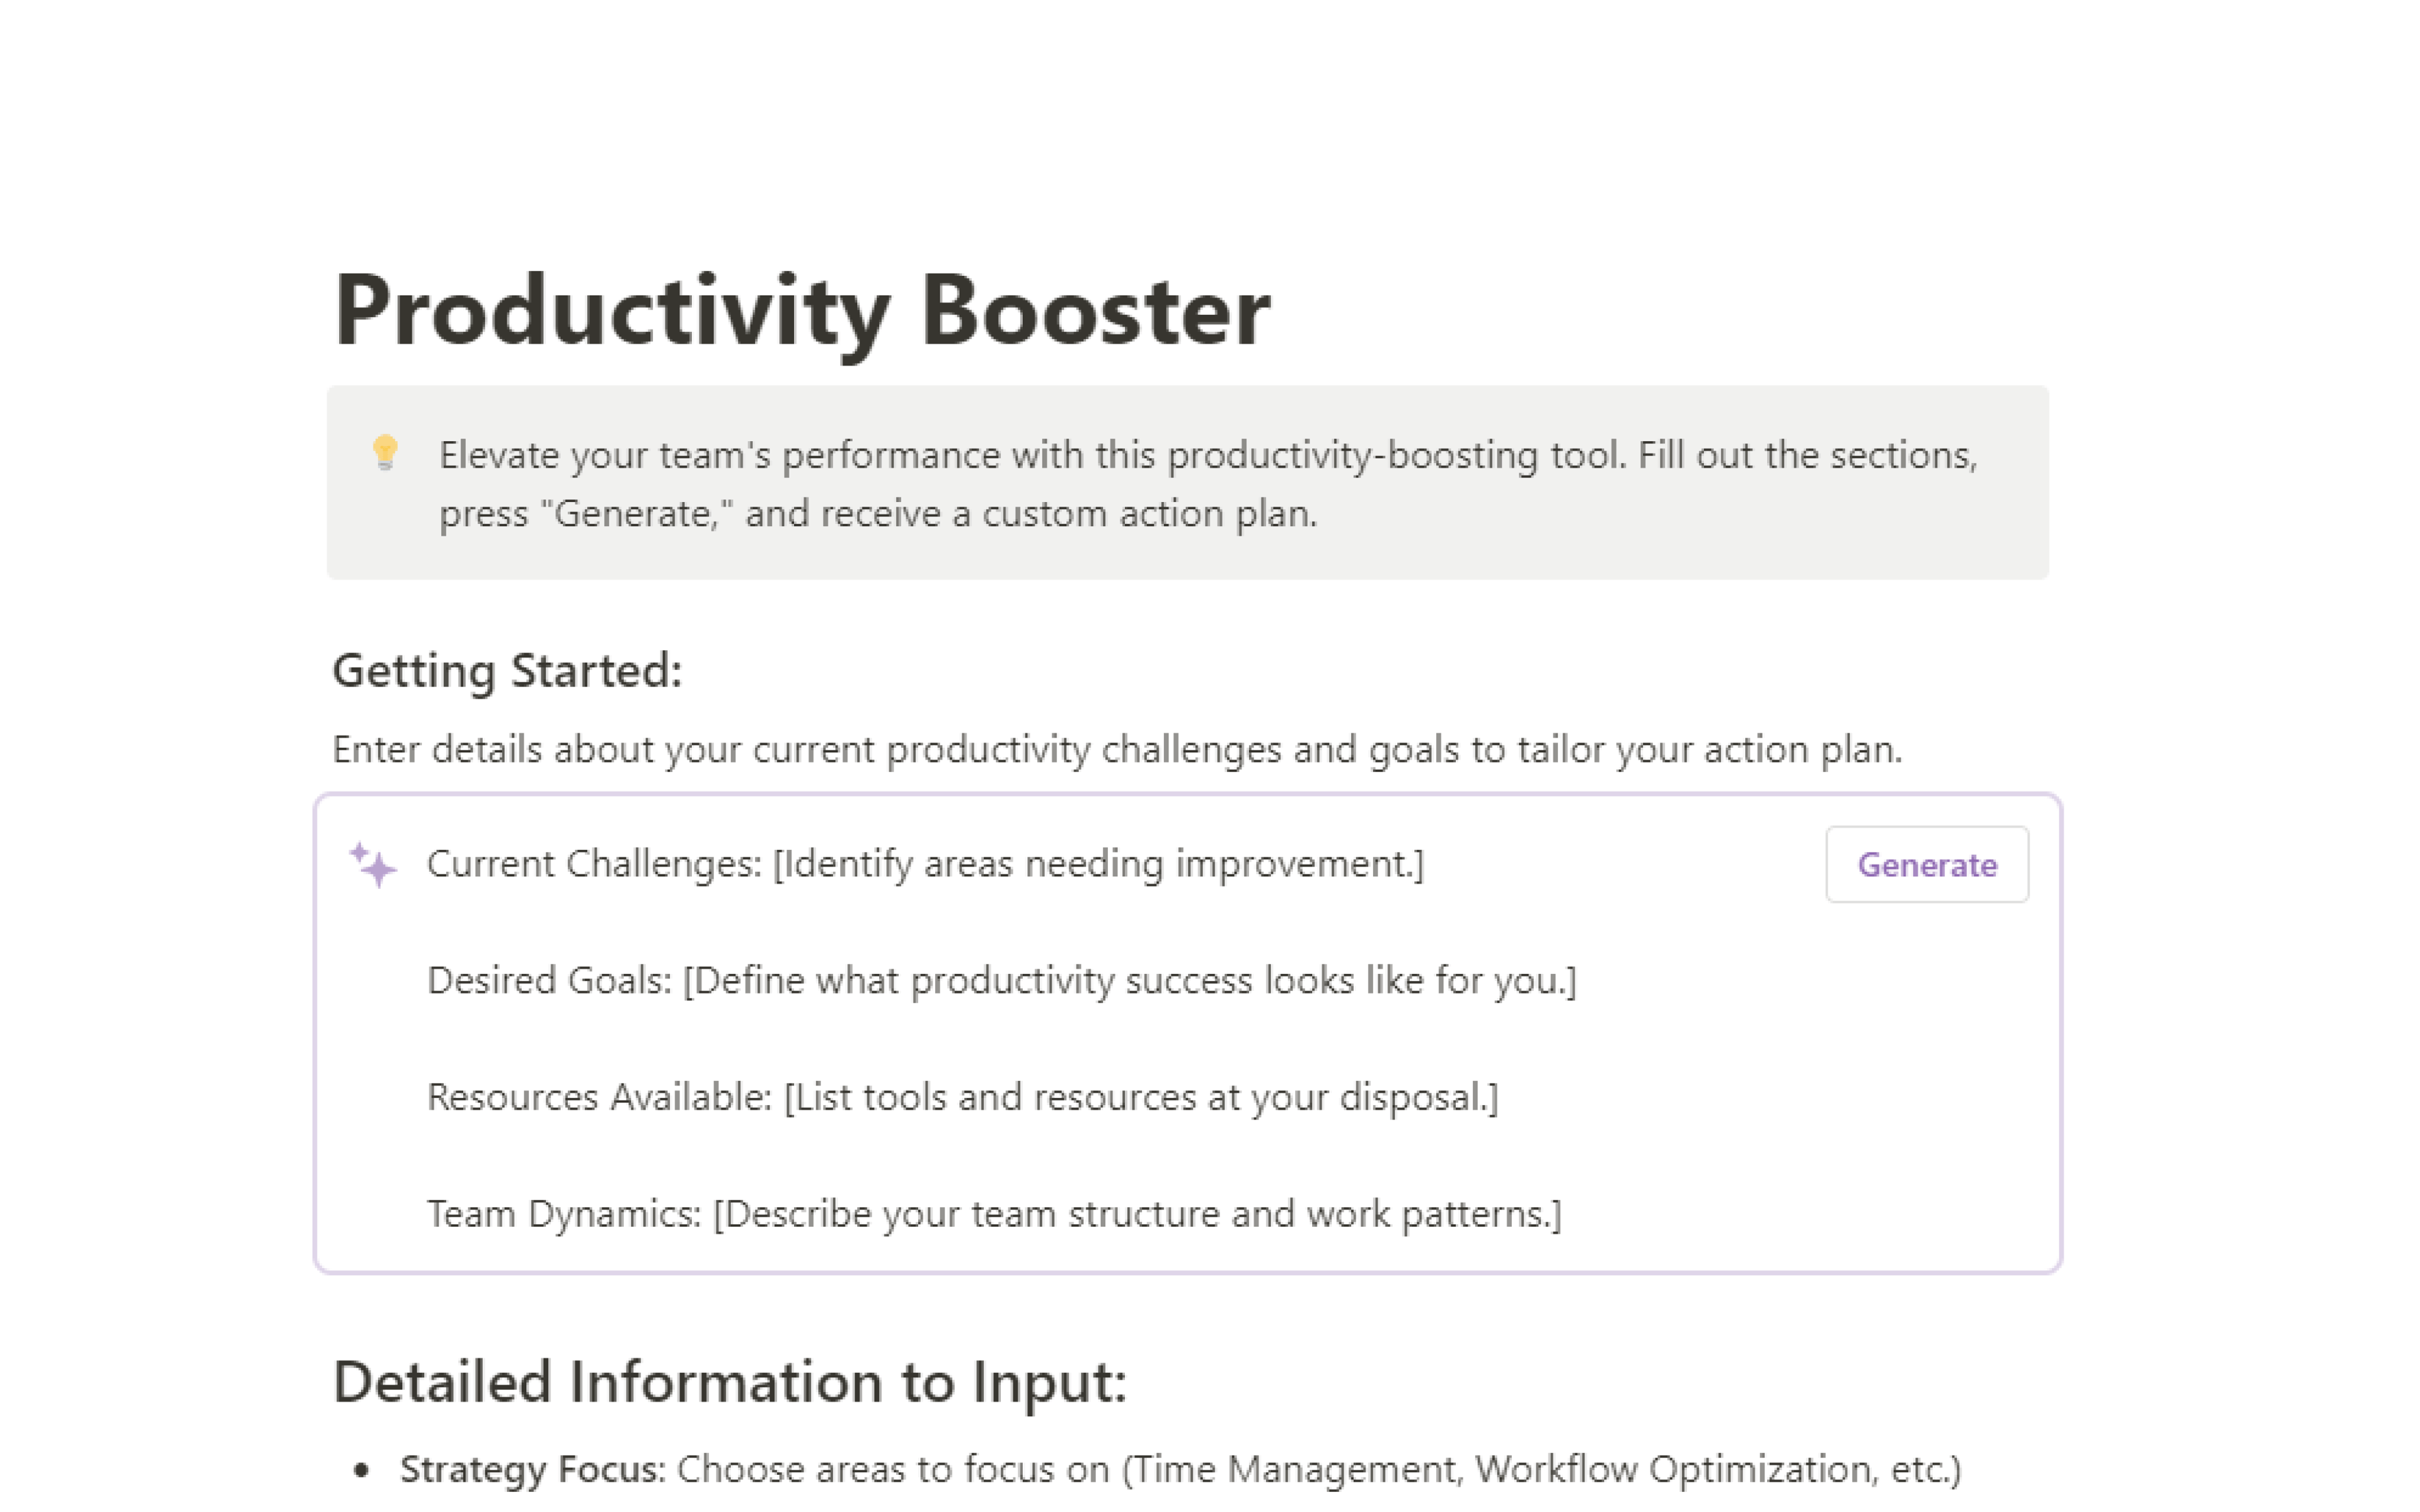 Optimize your team's output with the AI Productivity Booster template. Identify challenges, set goals, and align resources to streamline workflow and enhance efficiency.